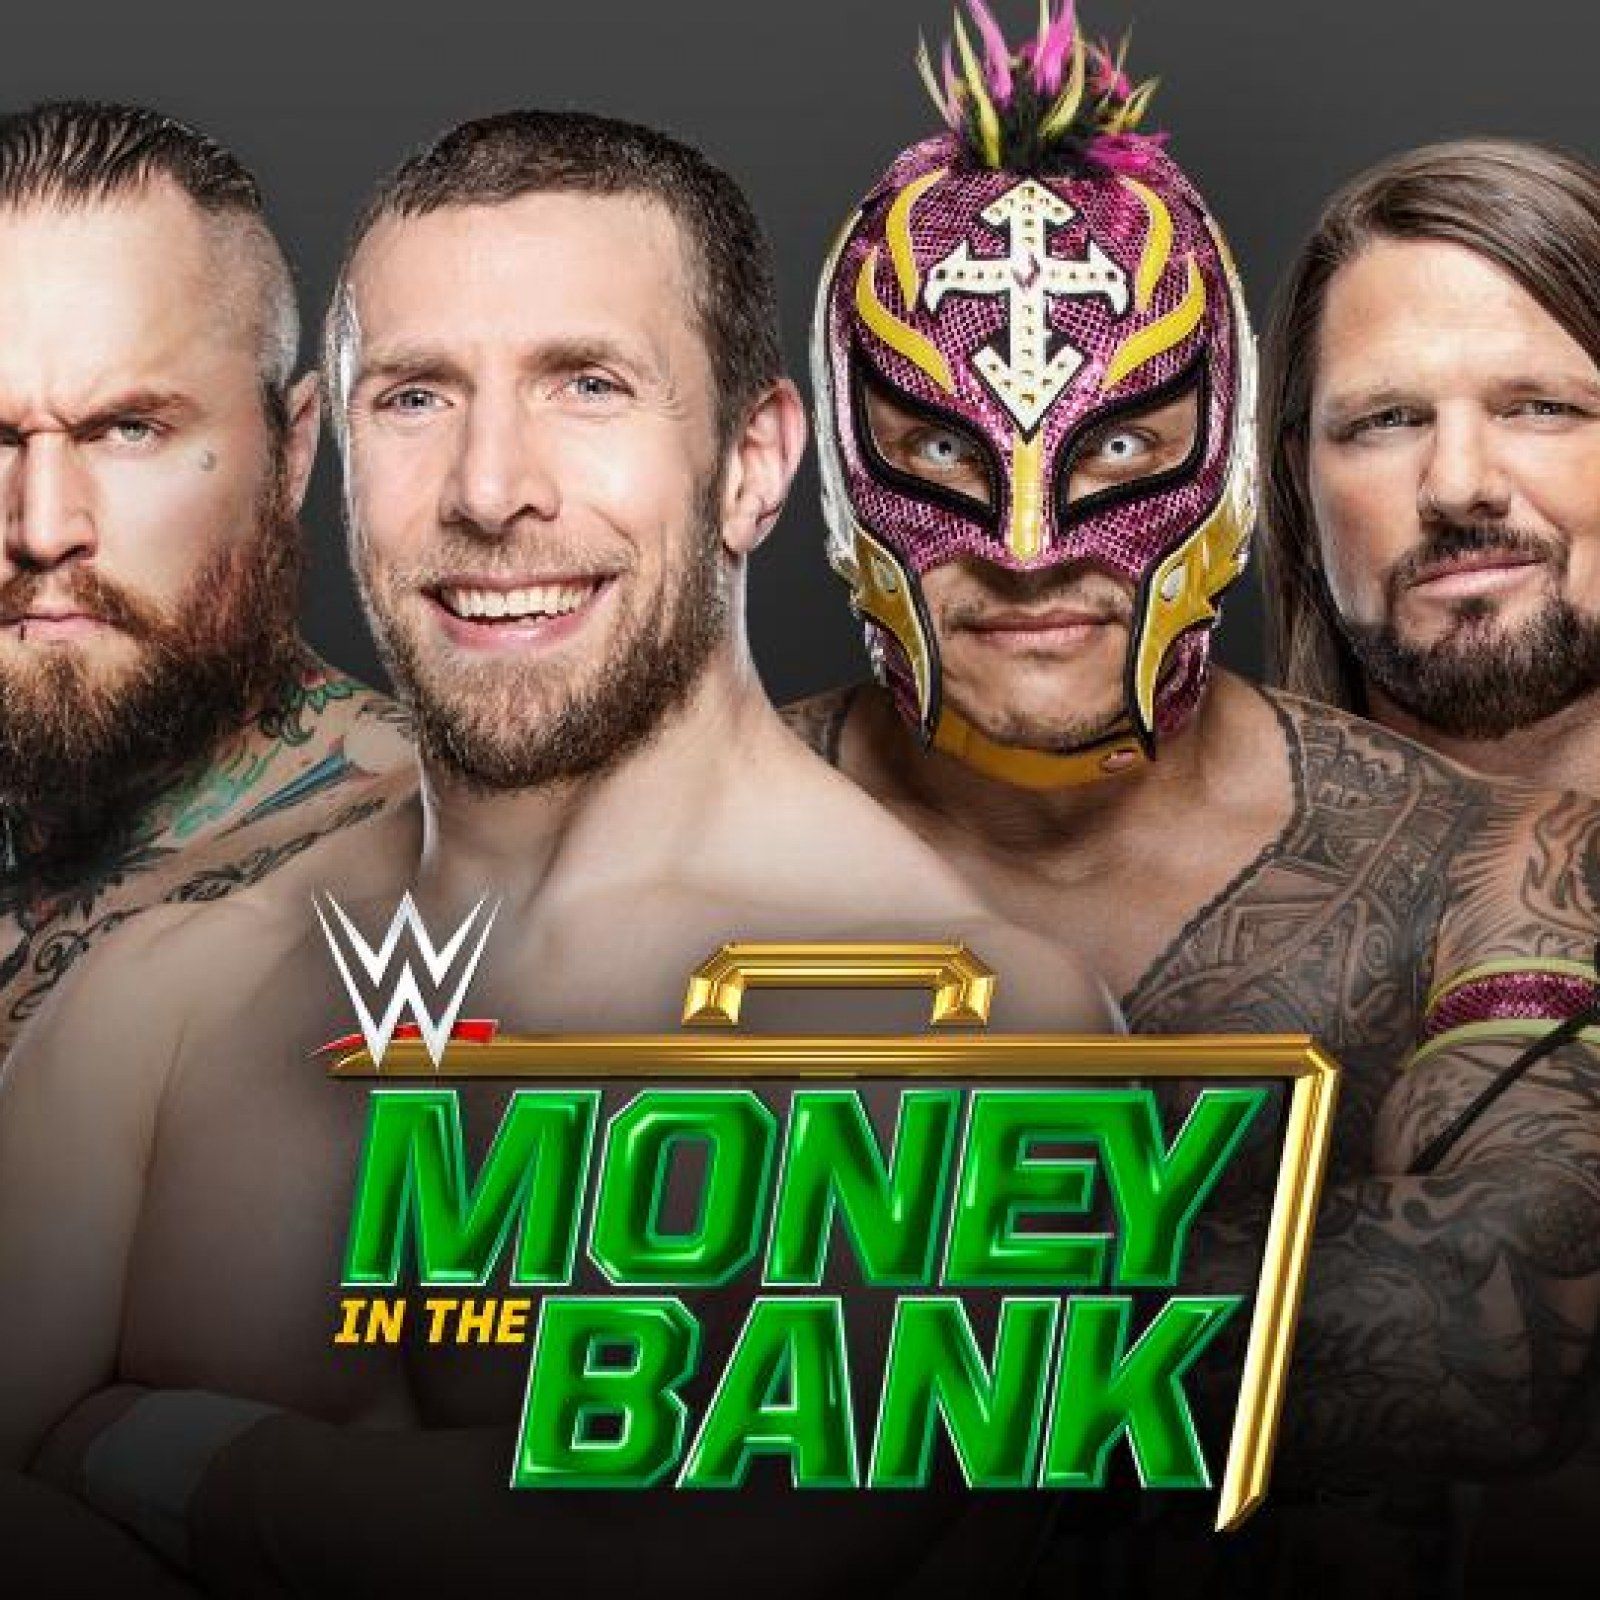 WWE 'Money in the Bank' 2020 Predictions: Who We Think Wins Each Match This Sunday